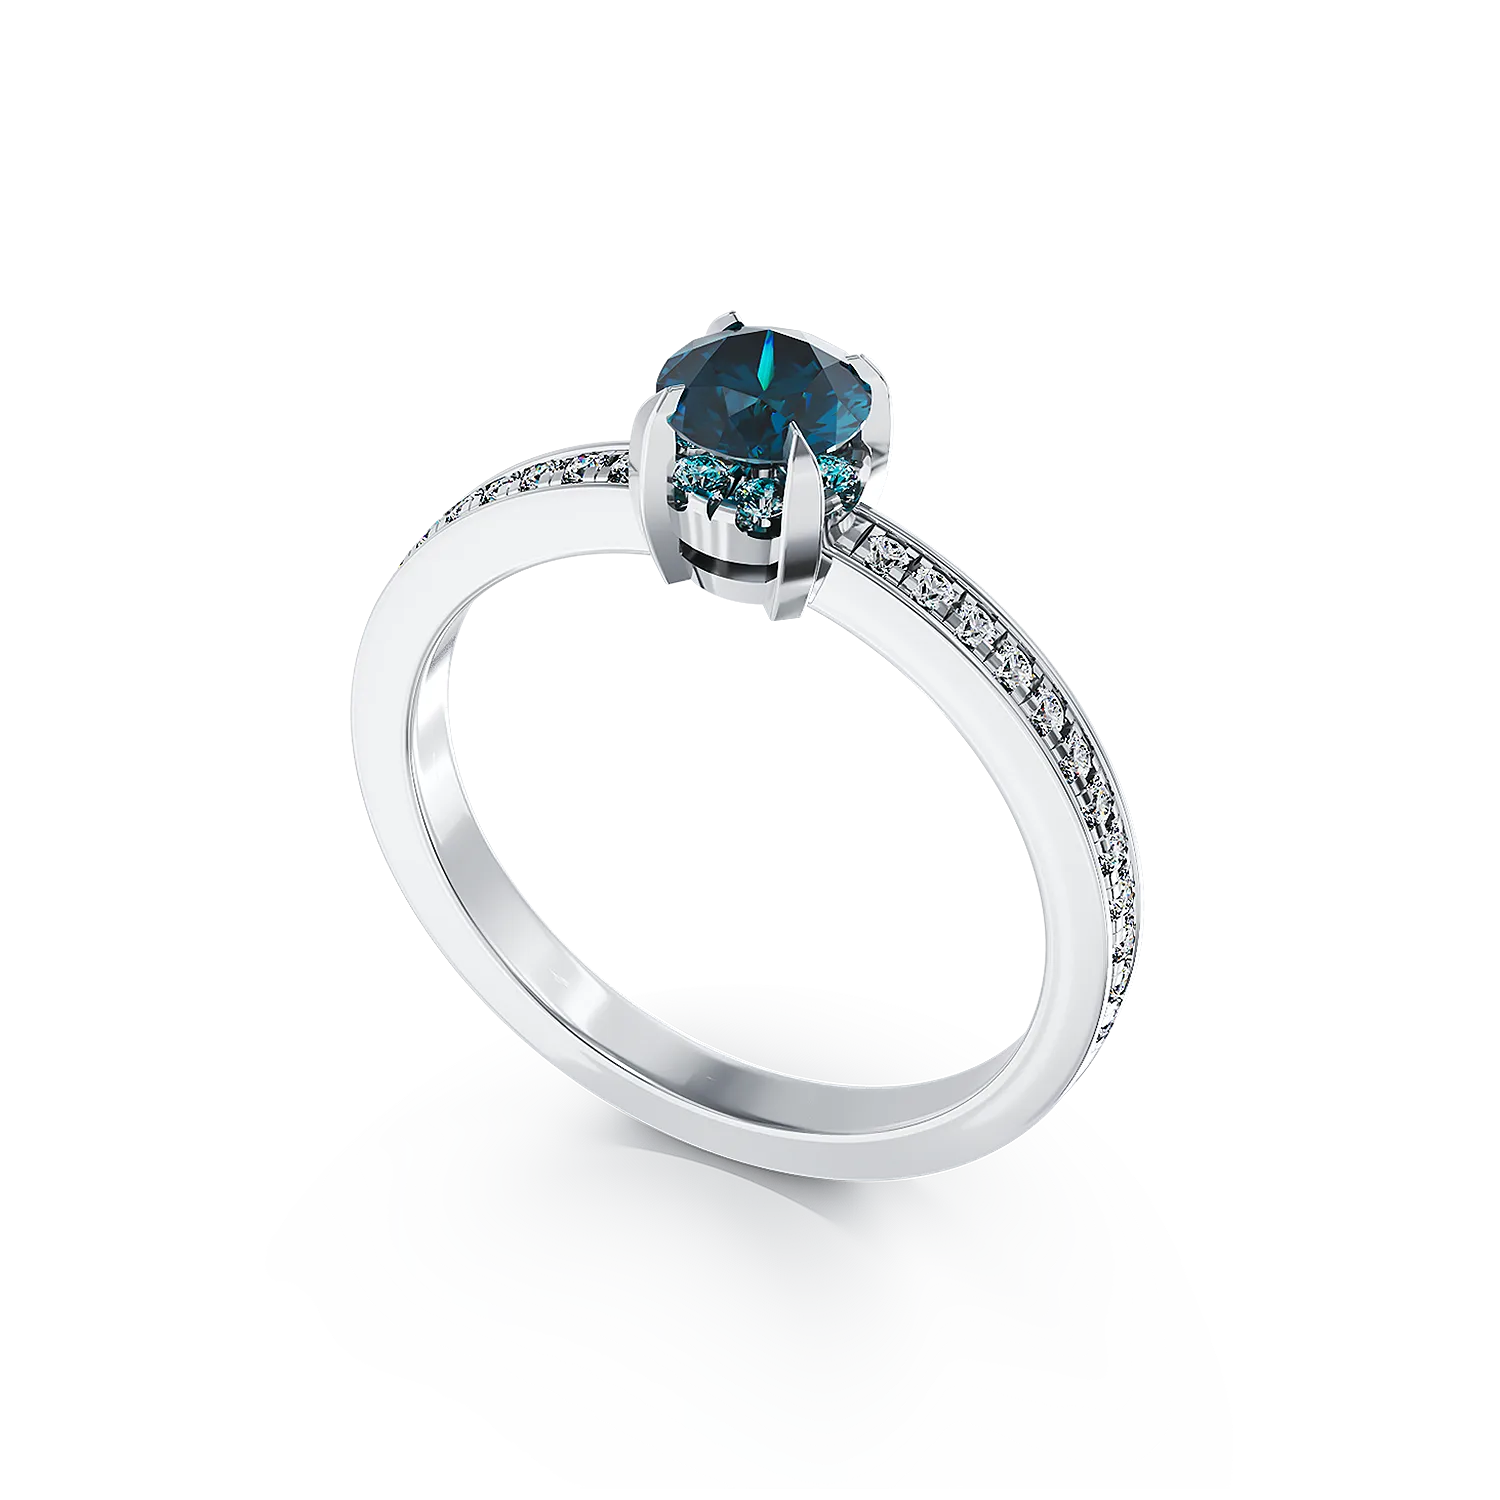 18K white gold engagement ring with 0.41ct blue diamond and 0.2ct transparent diamonds